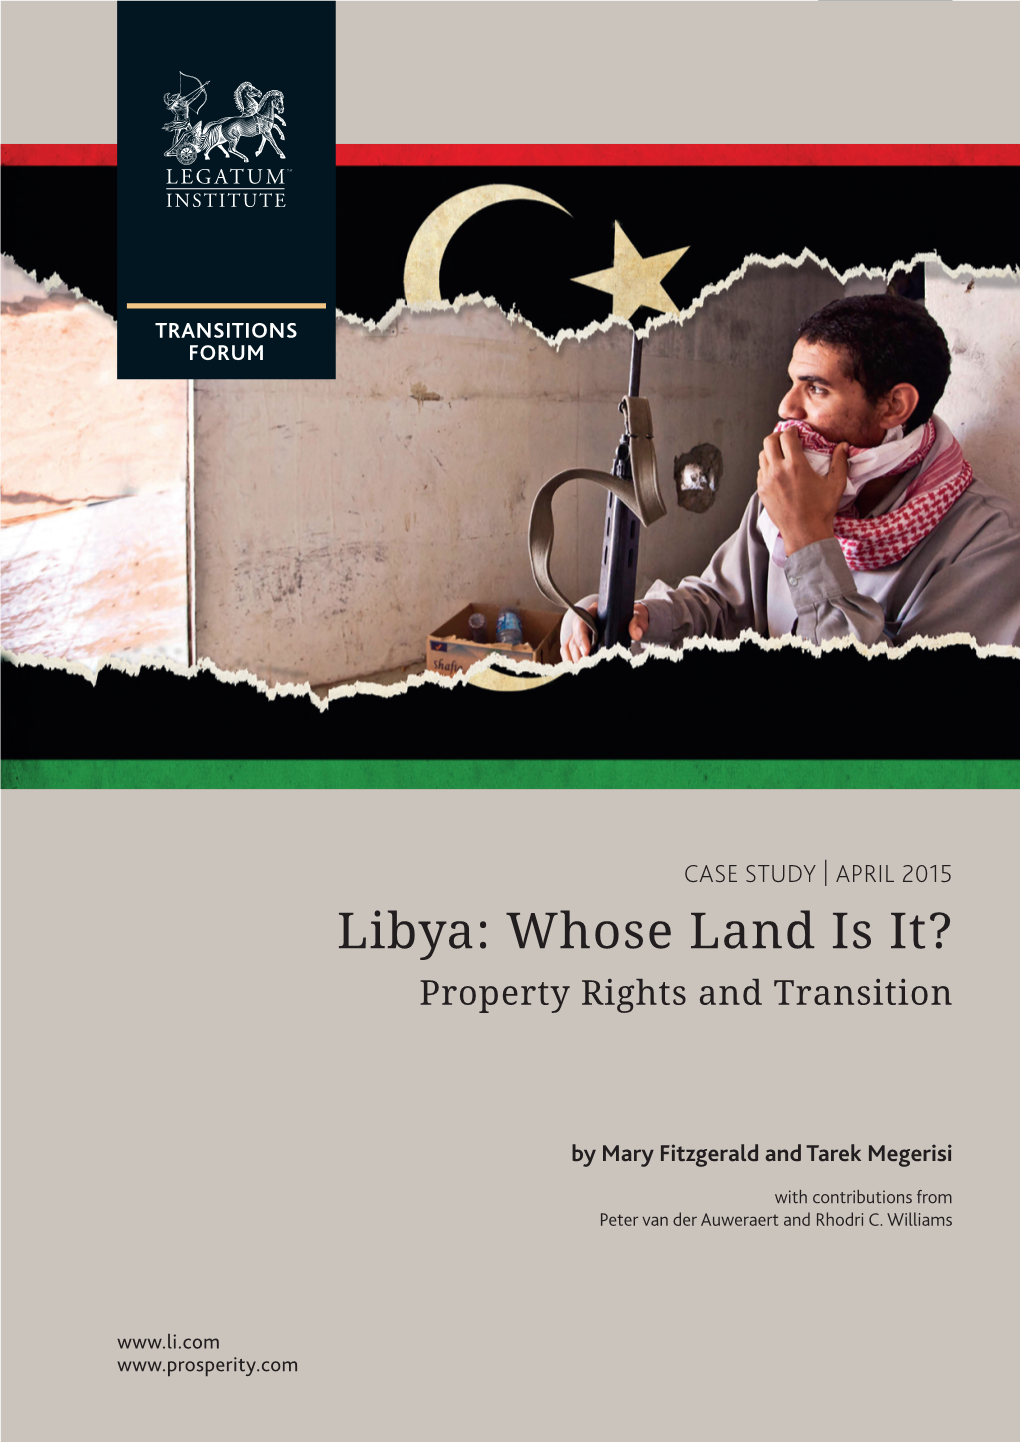 Libya: Whose Land Is It? Property Rights and Transition